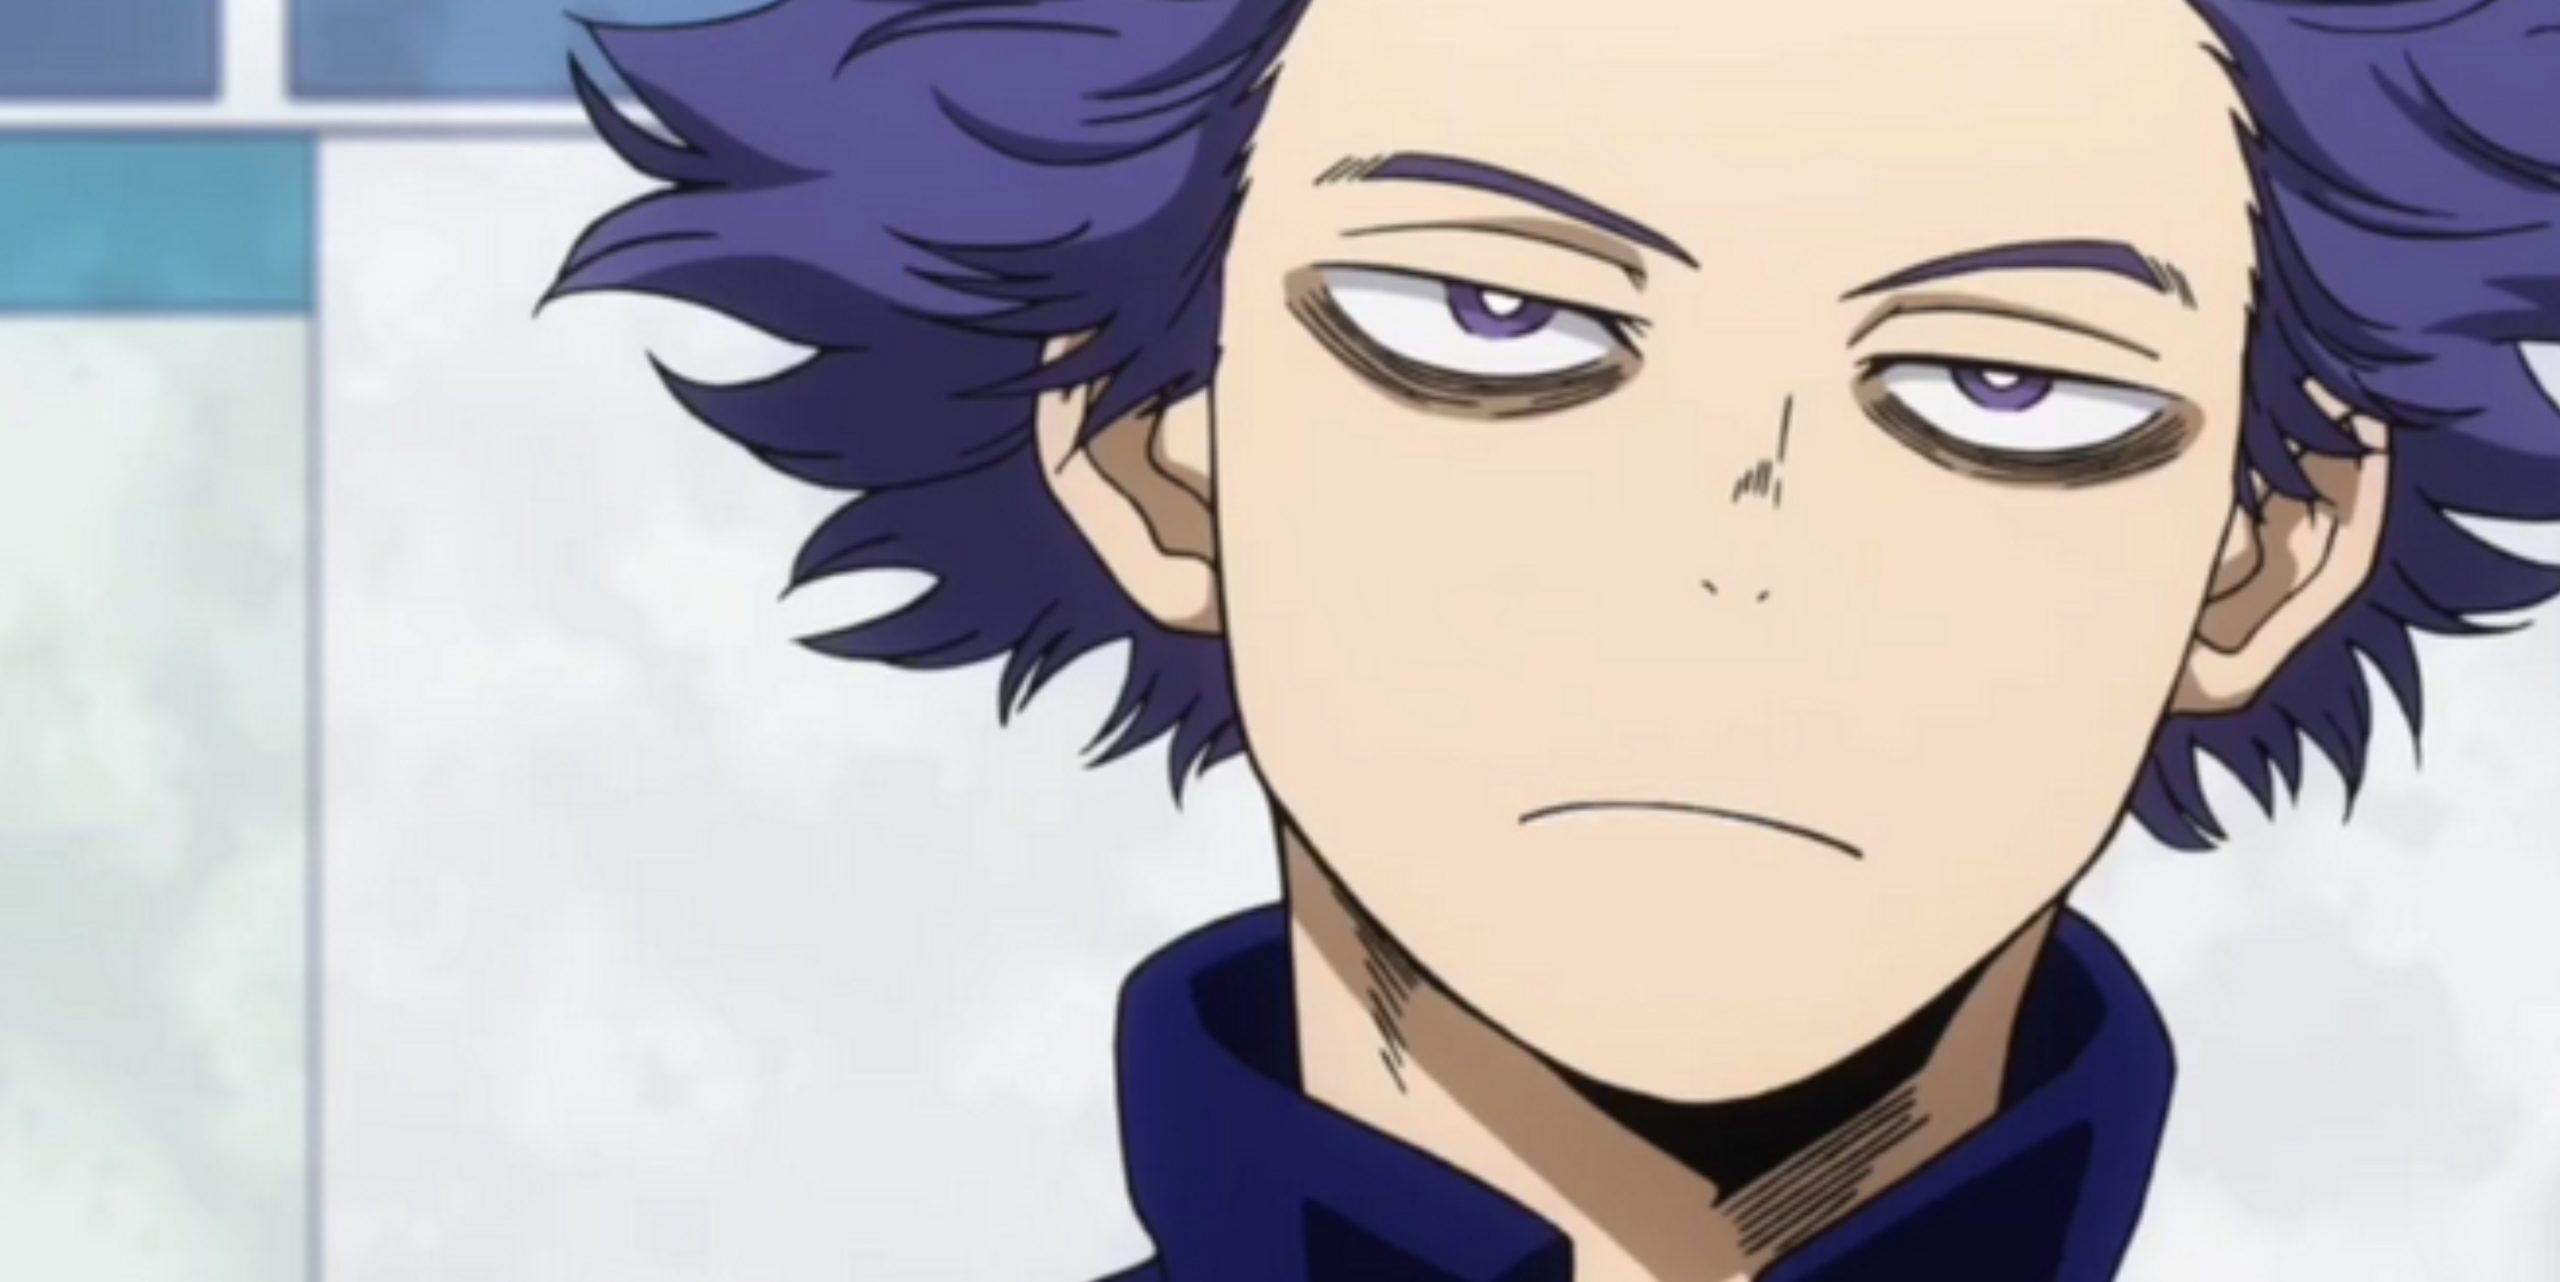 1706973390 942 The Real Why Hitoshi Shinso Is Such A Popular Character